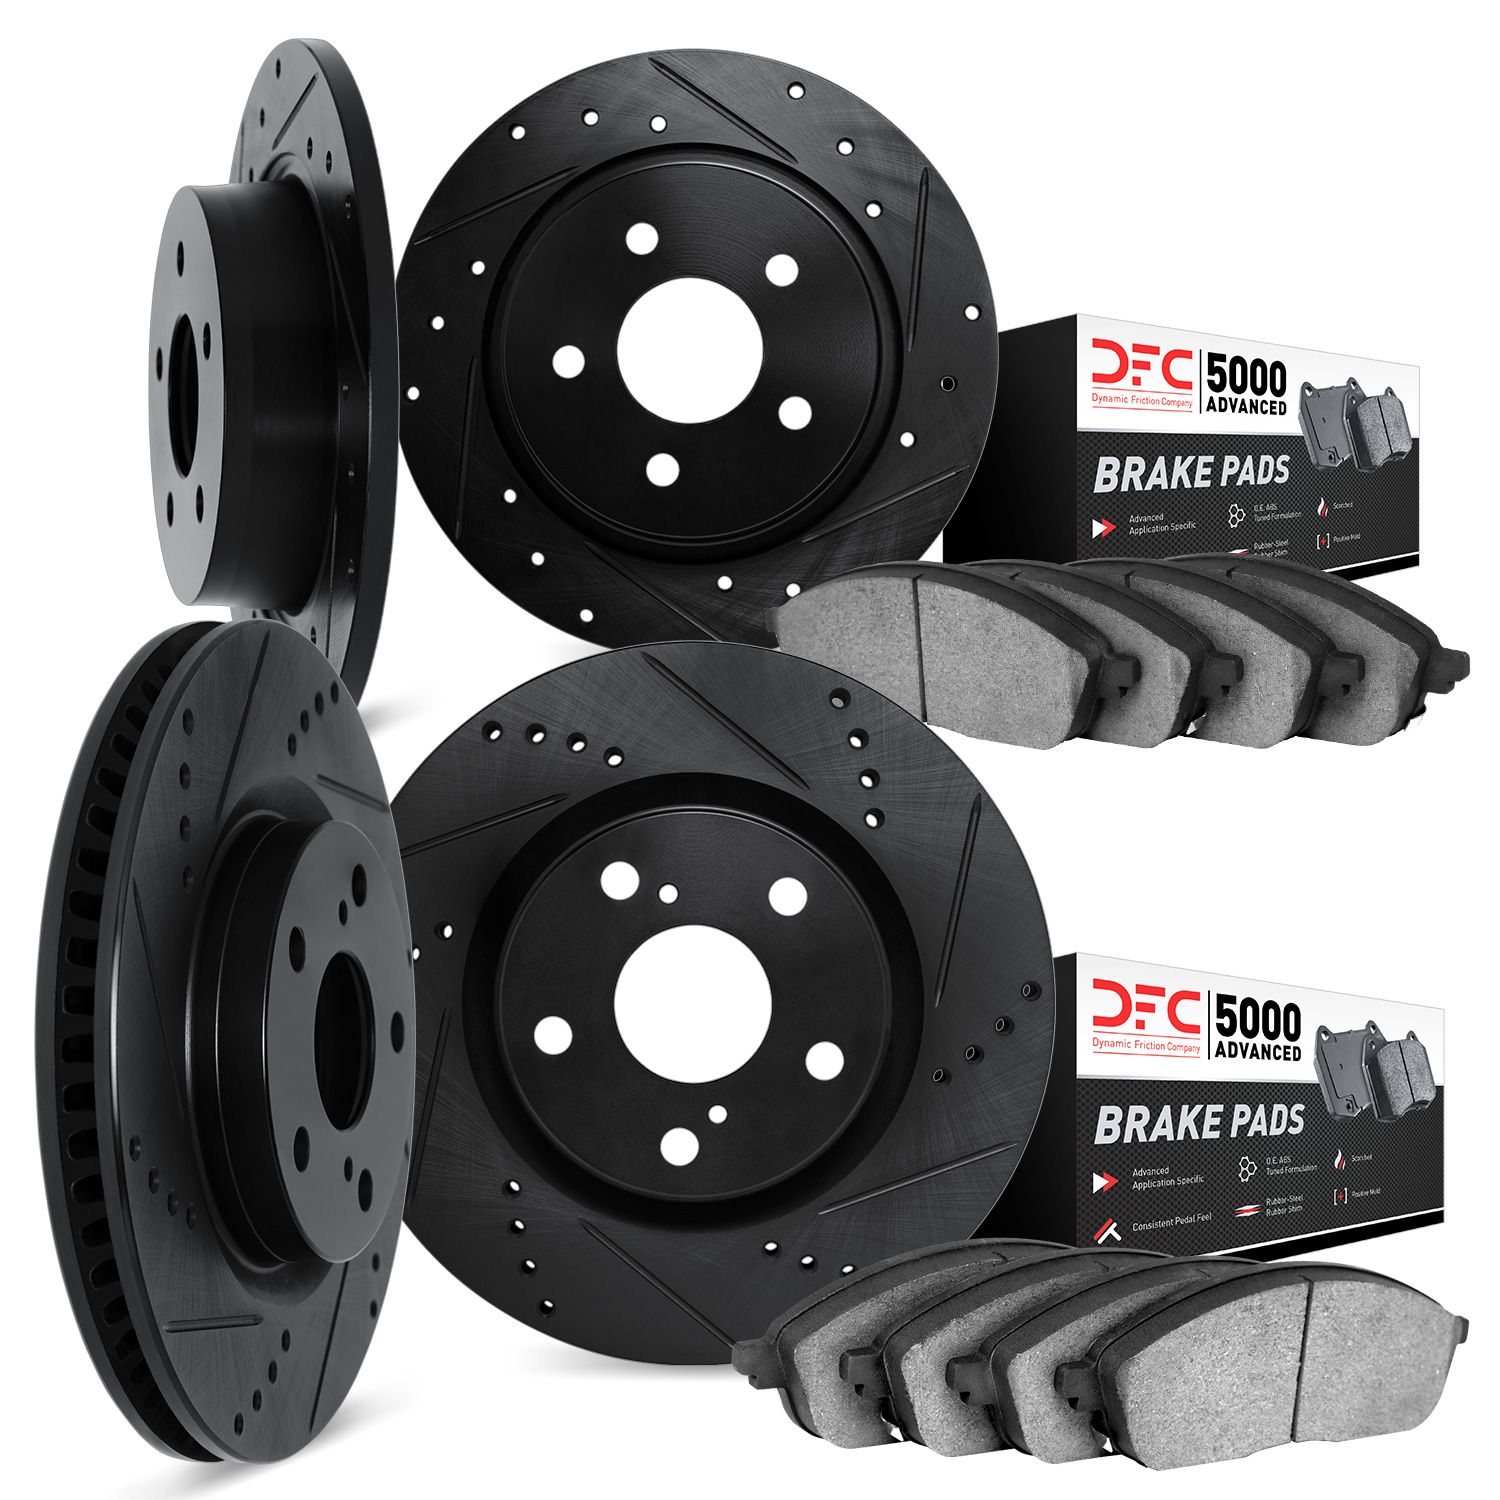 8504-42058 Drilled/Slotted Brake Rotors w/5000 Advanced Brake Pads Kit [Black], Fits Select Mopar, Position: Front and Rear